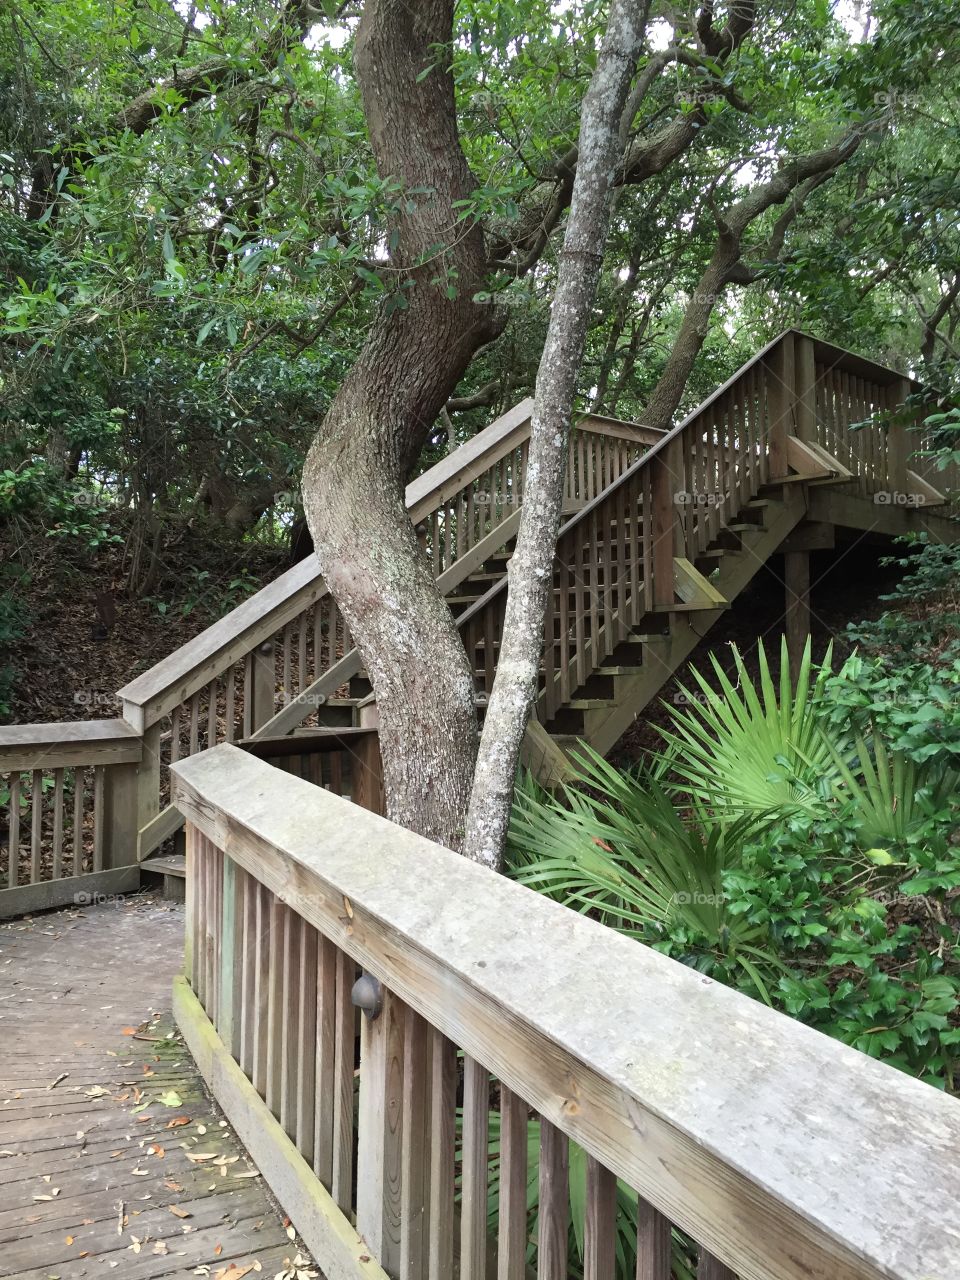 View of staircases on forest